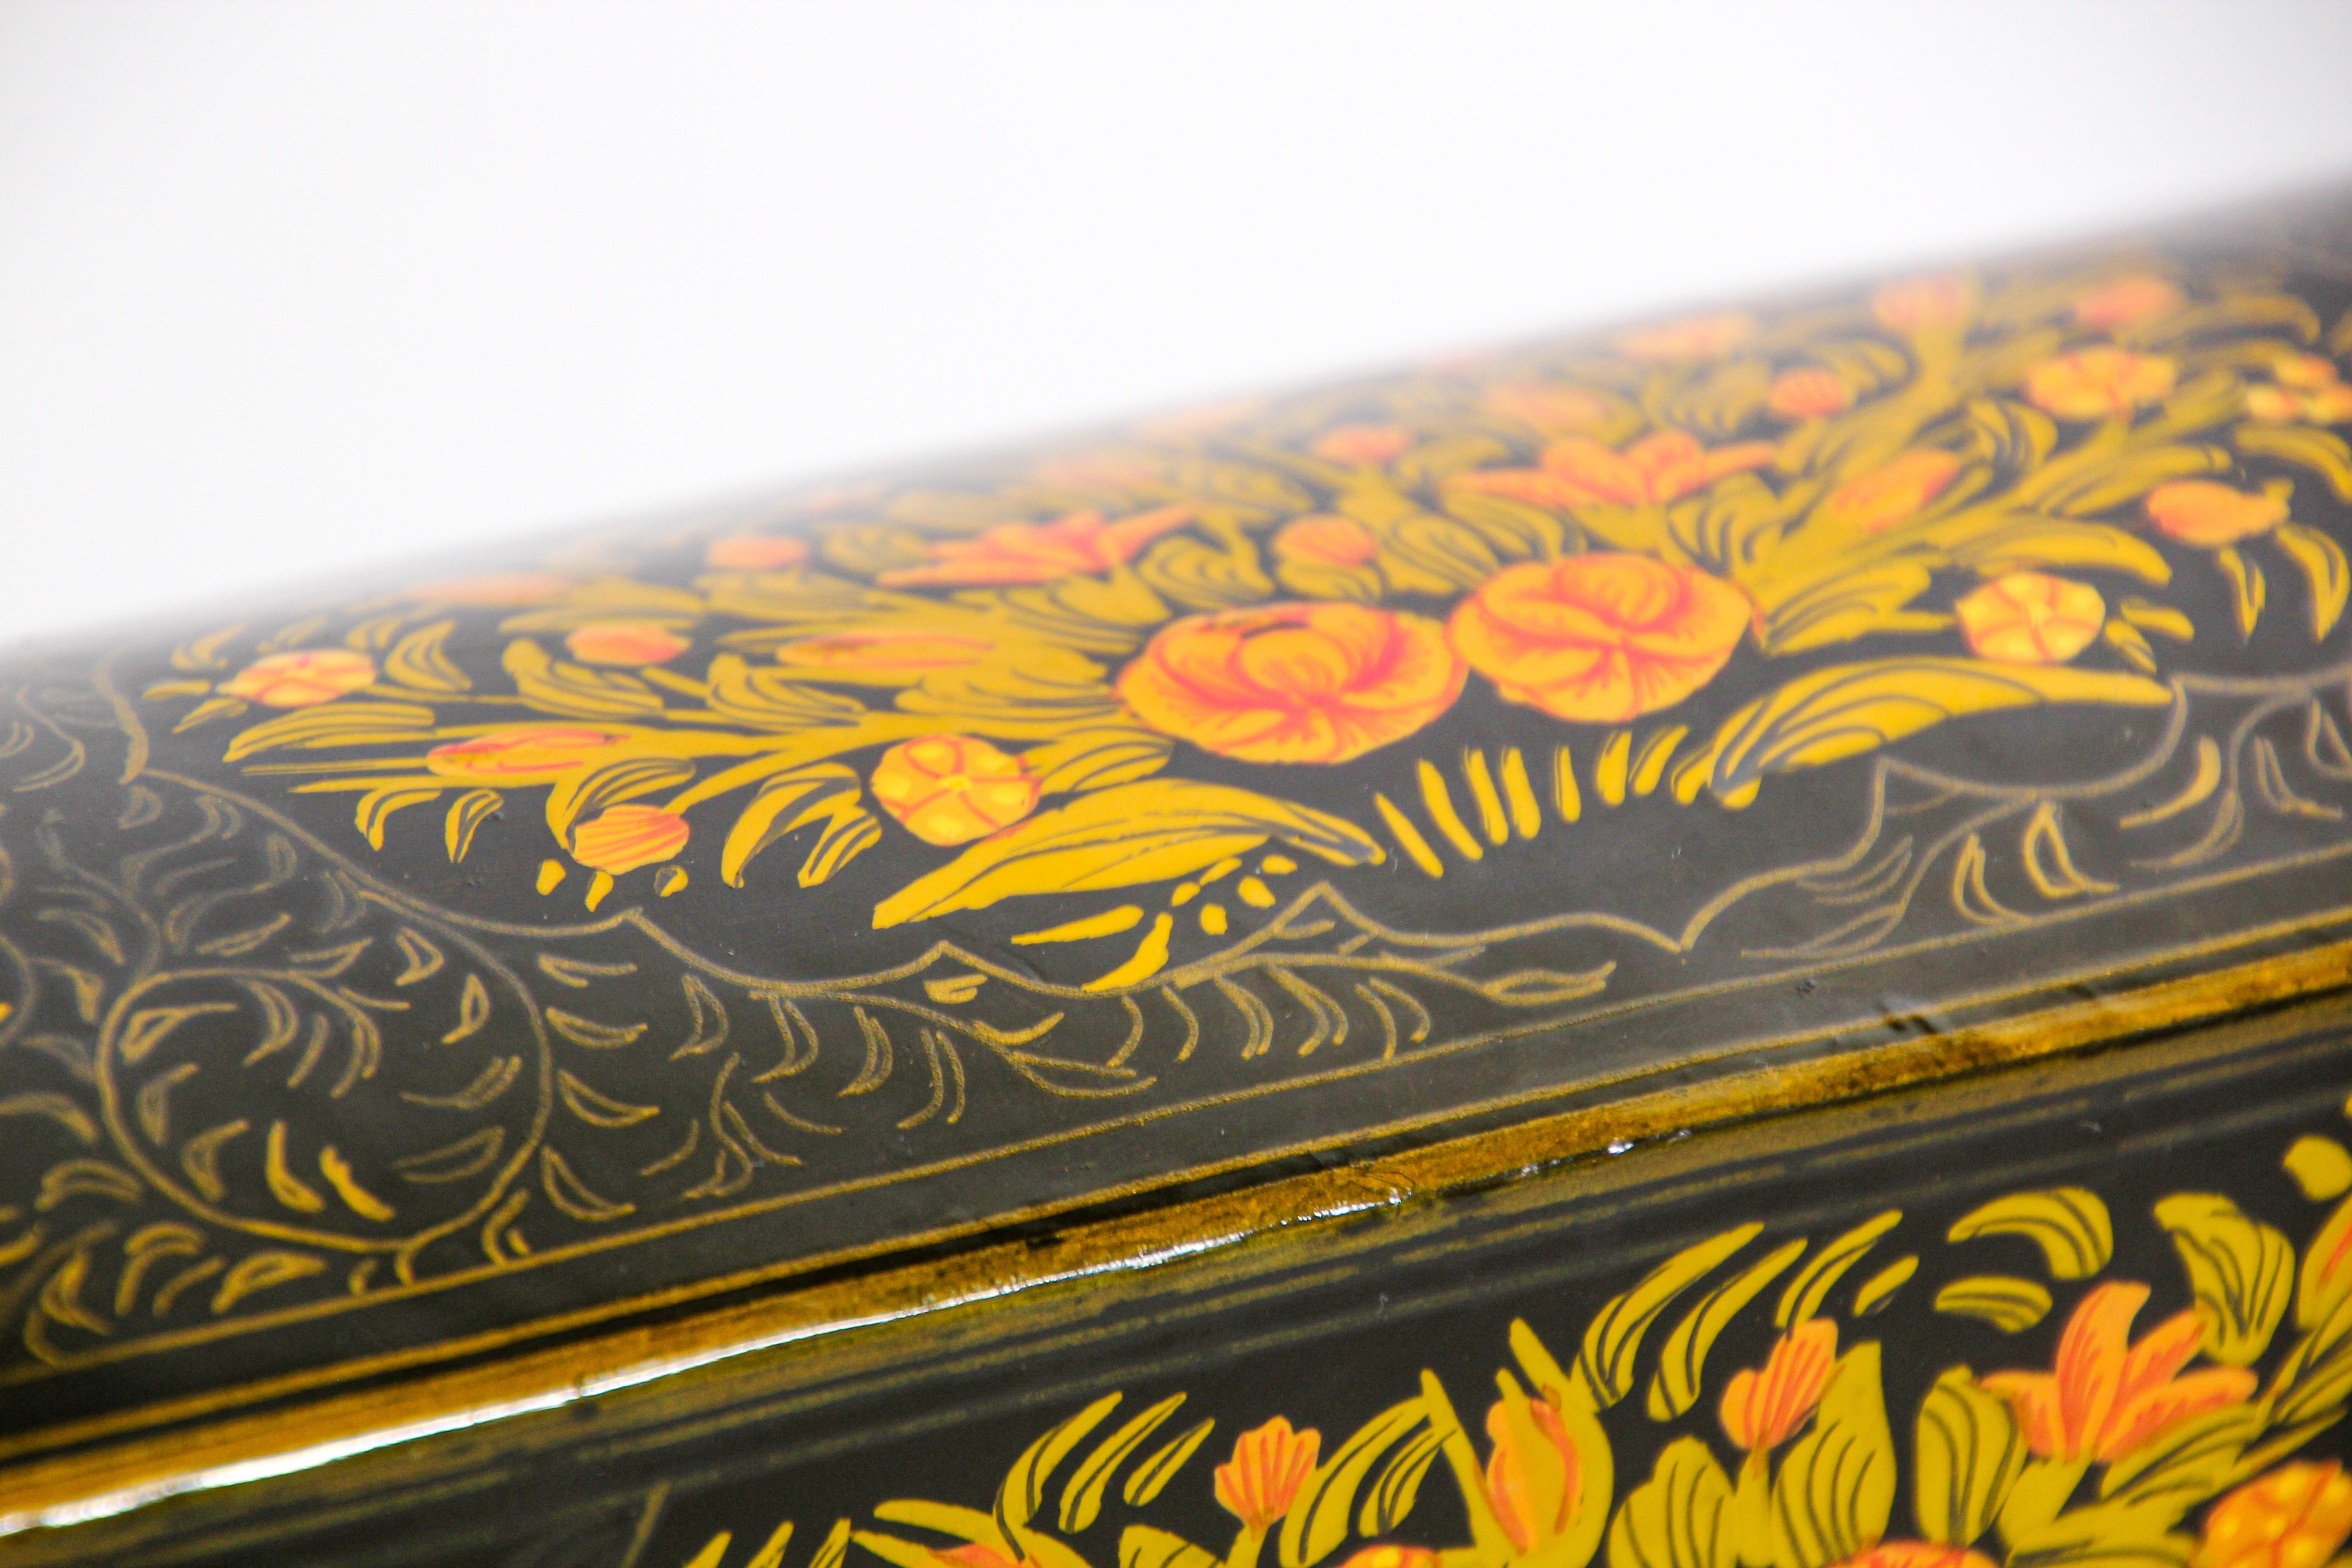 Paper Indo Persian Lacquer Pen Box Hand Painted with Floral Design